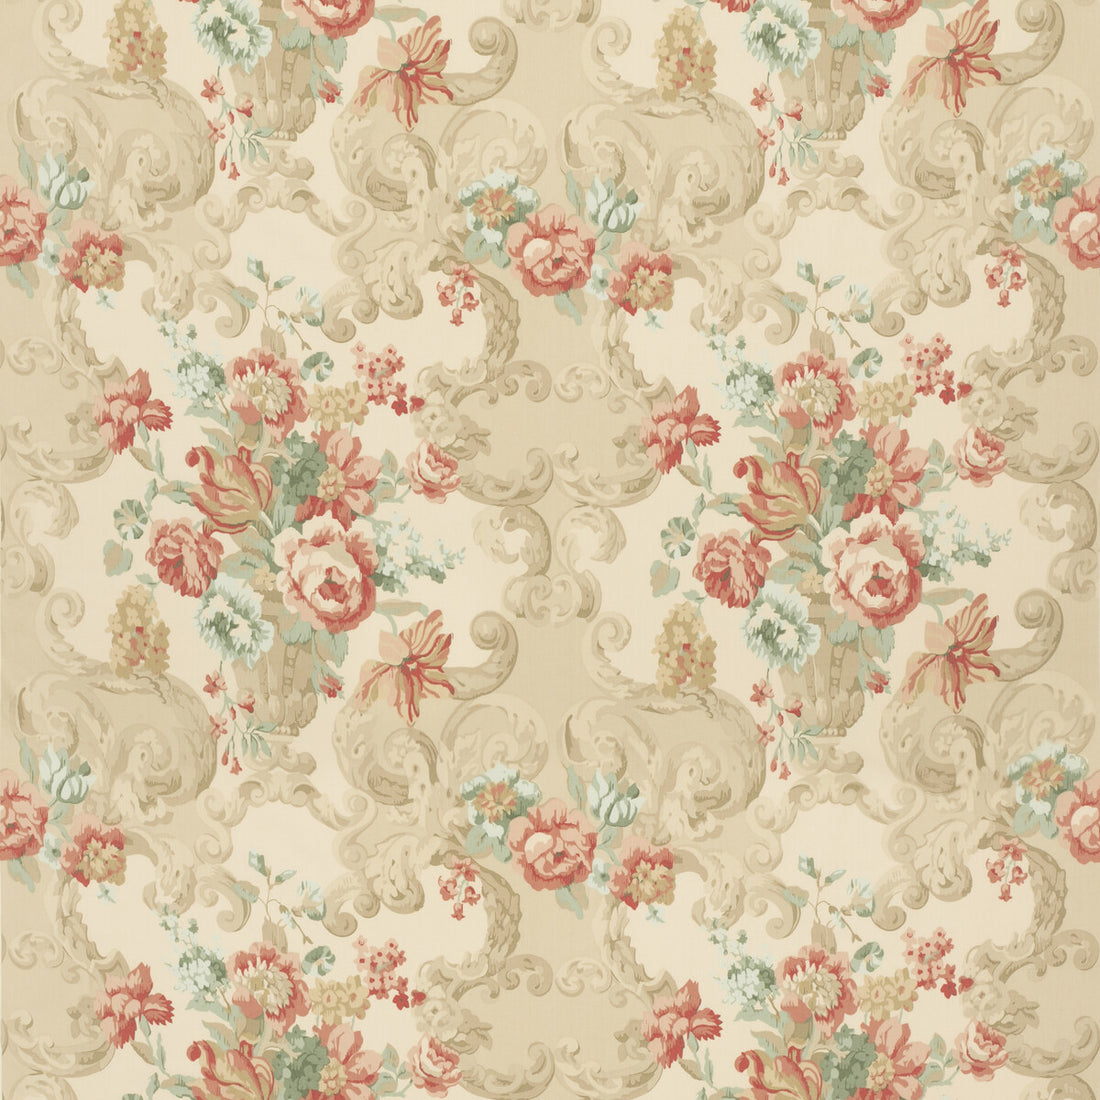 Floral Rococo fabric in lovat/red color - pattern FD2011.R114.0 - by Mulberry in the Icons Fabrics collection